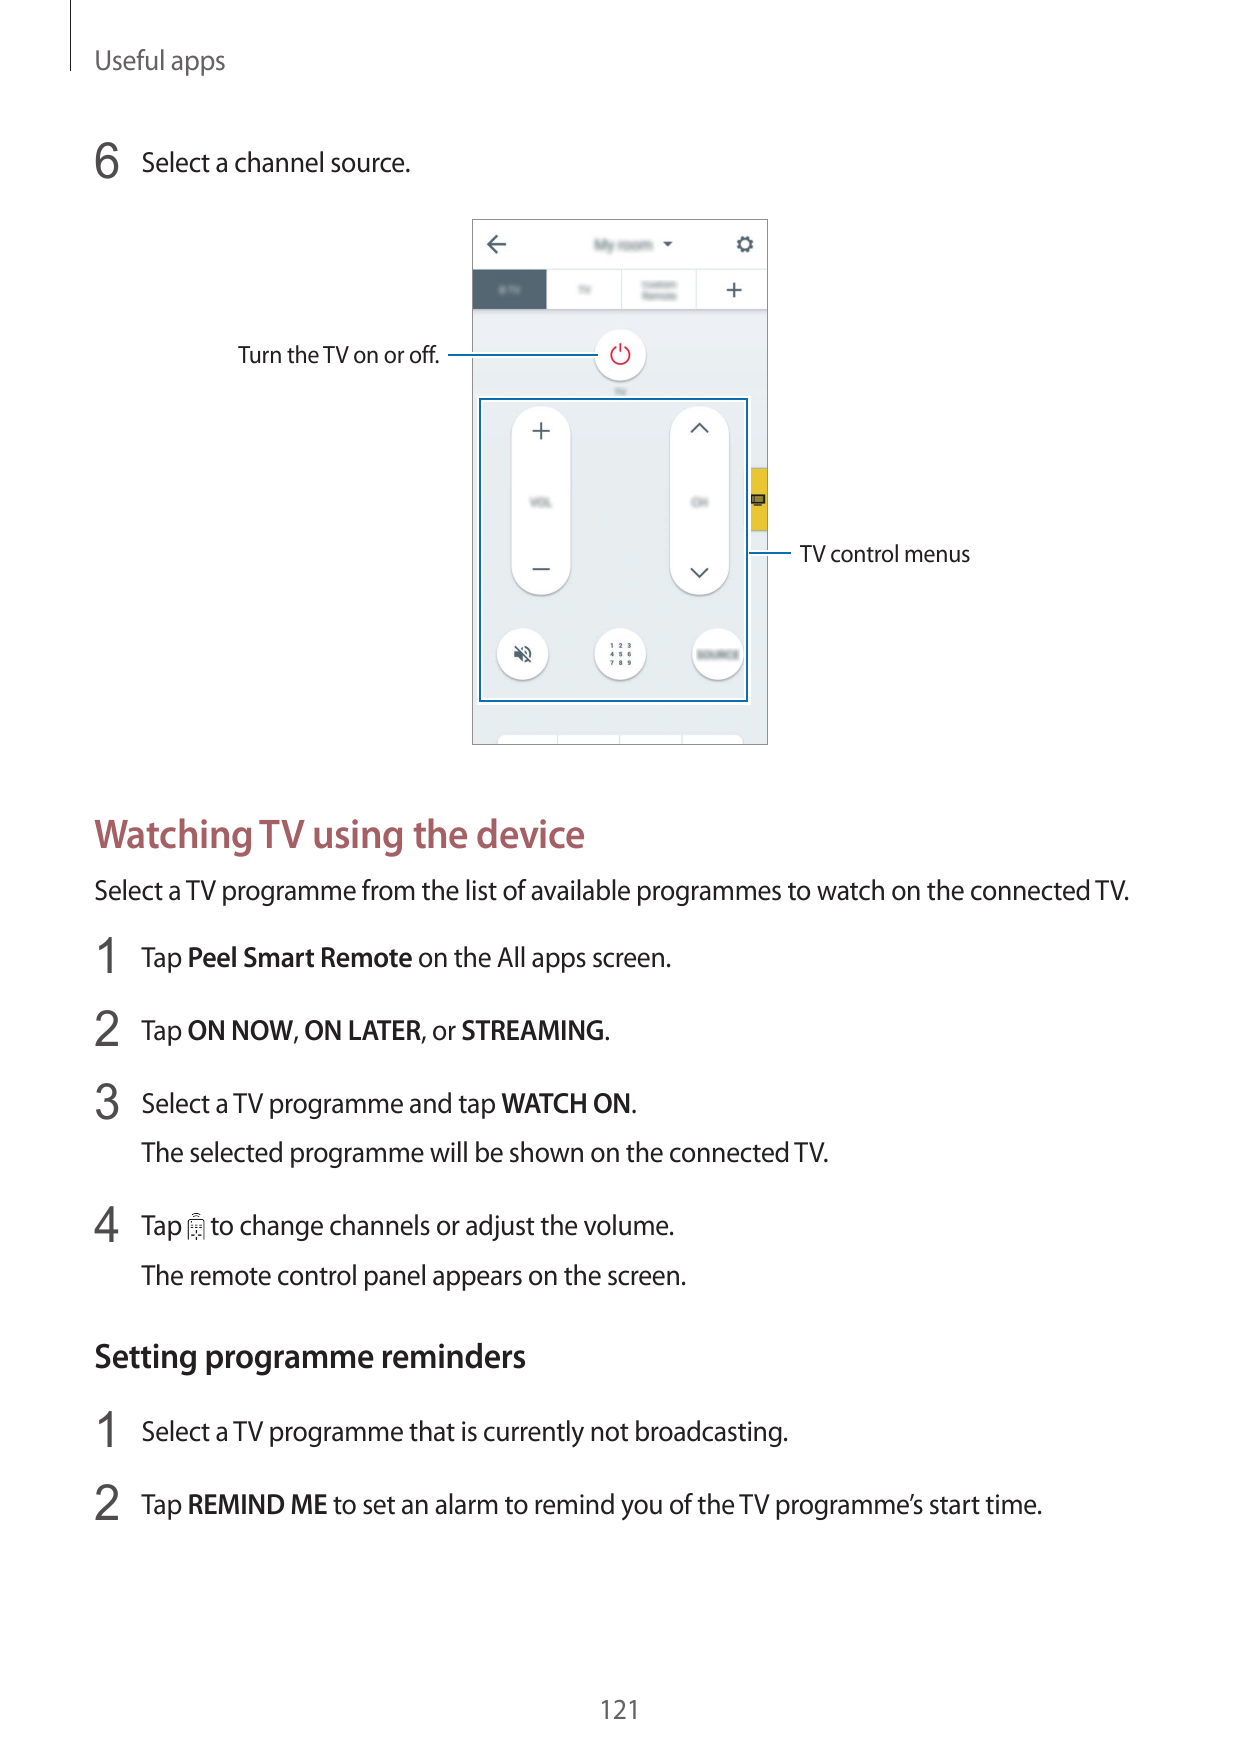 Useful apps6 Select a channel source.Turn the TV on or off.TV control menusWatching TV using the deviceSelect a TV programme fro